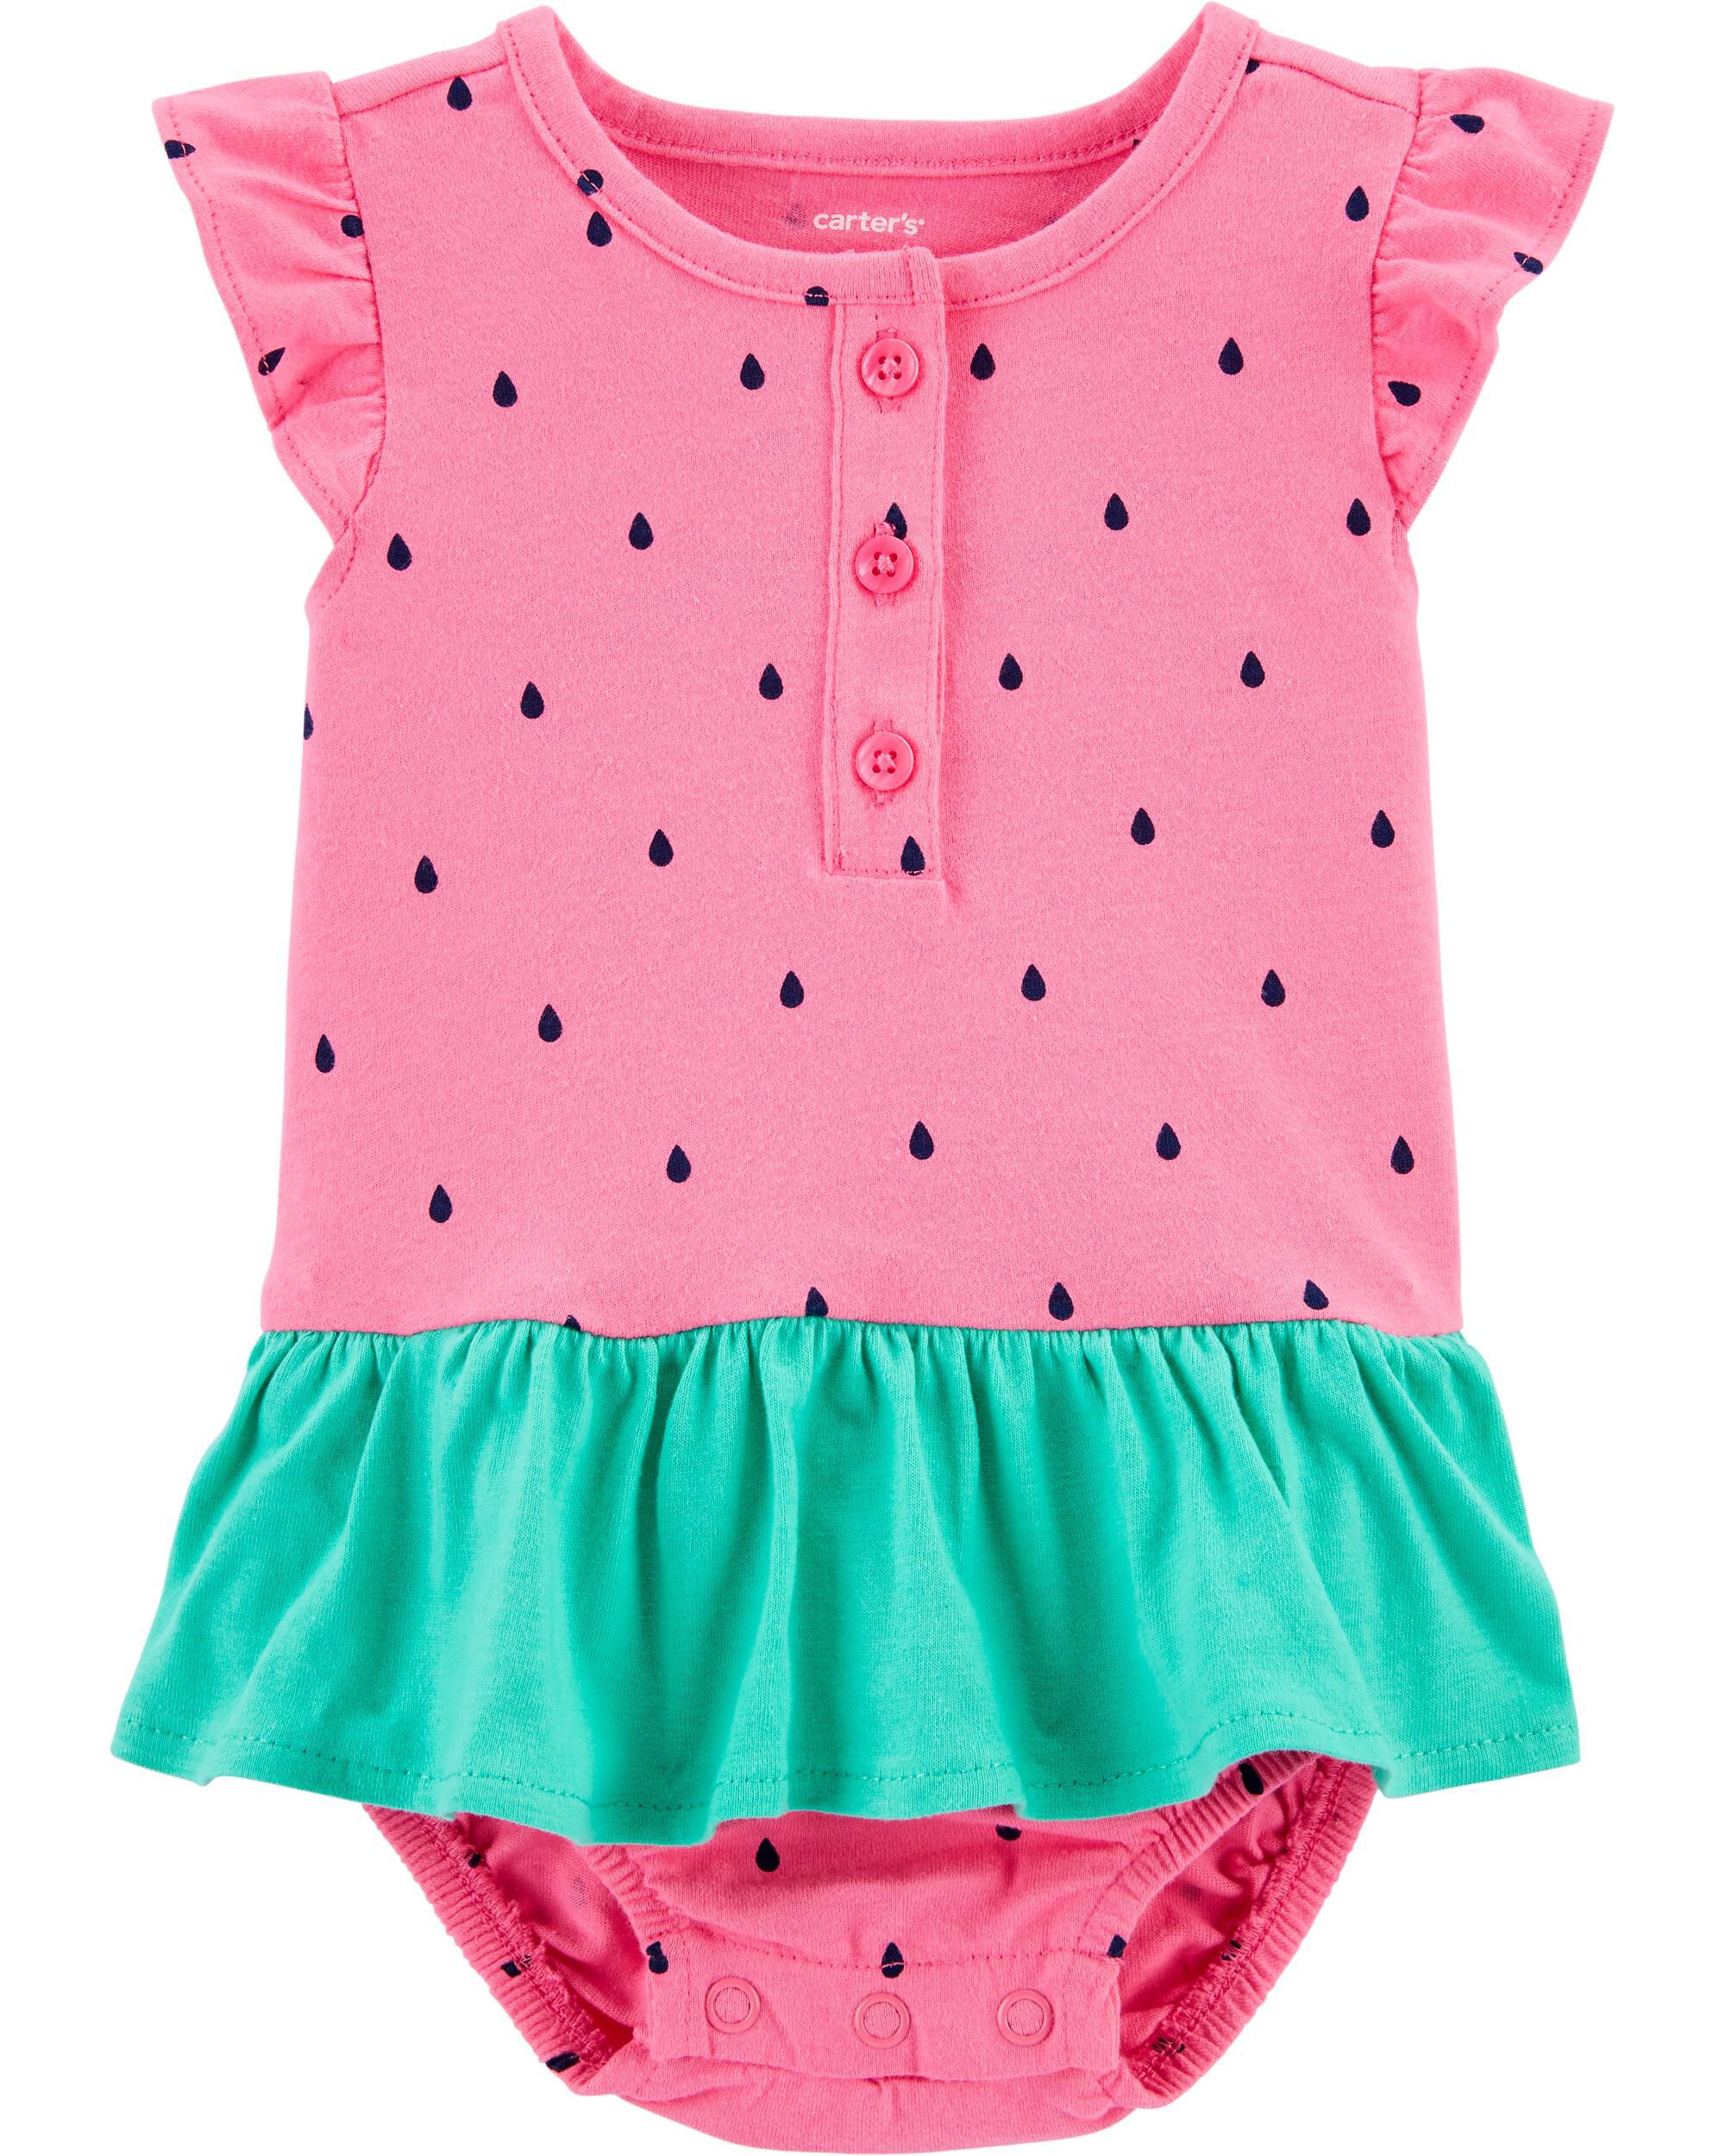 watermelon baby clothes